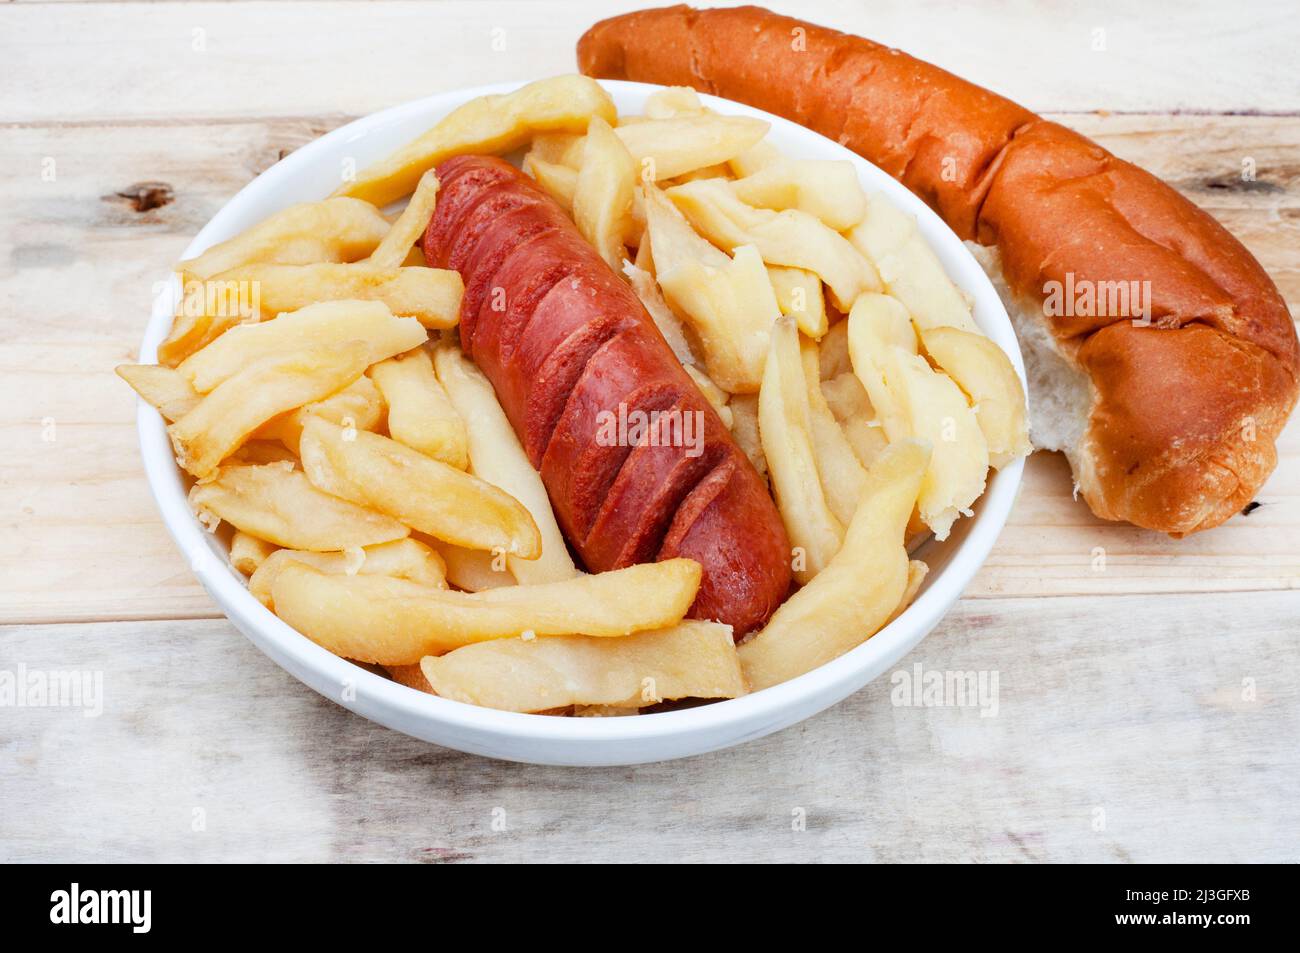 traditional South African take away or street food, Russian sausage and potato chips Stock Photo